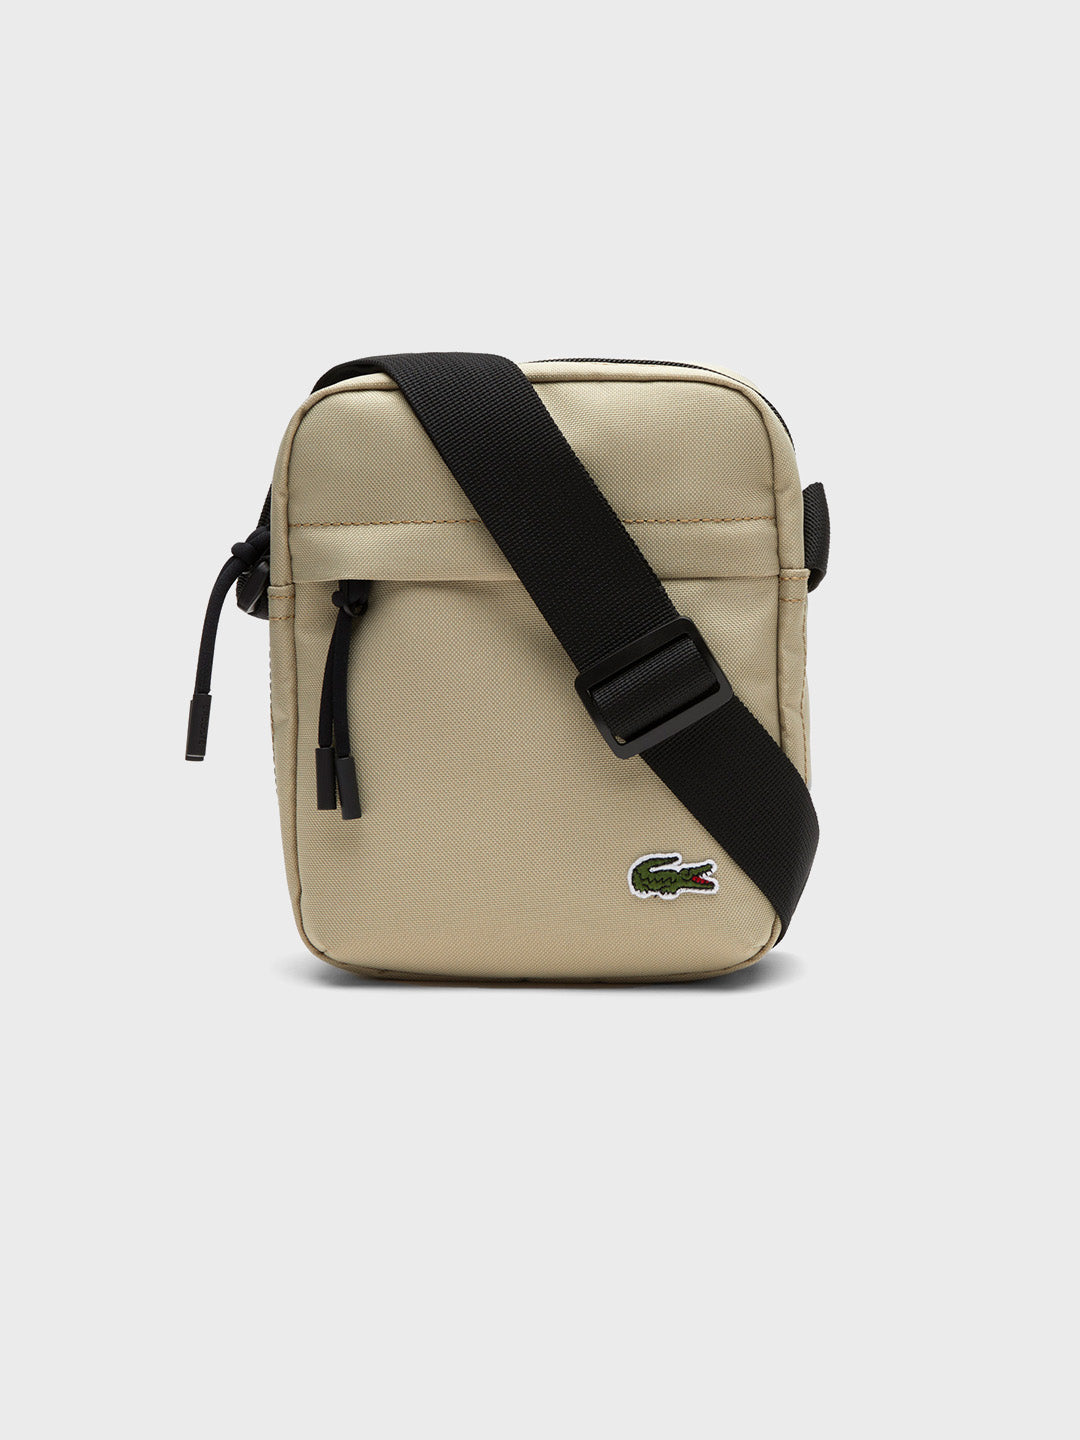 Lacoste crossover bag